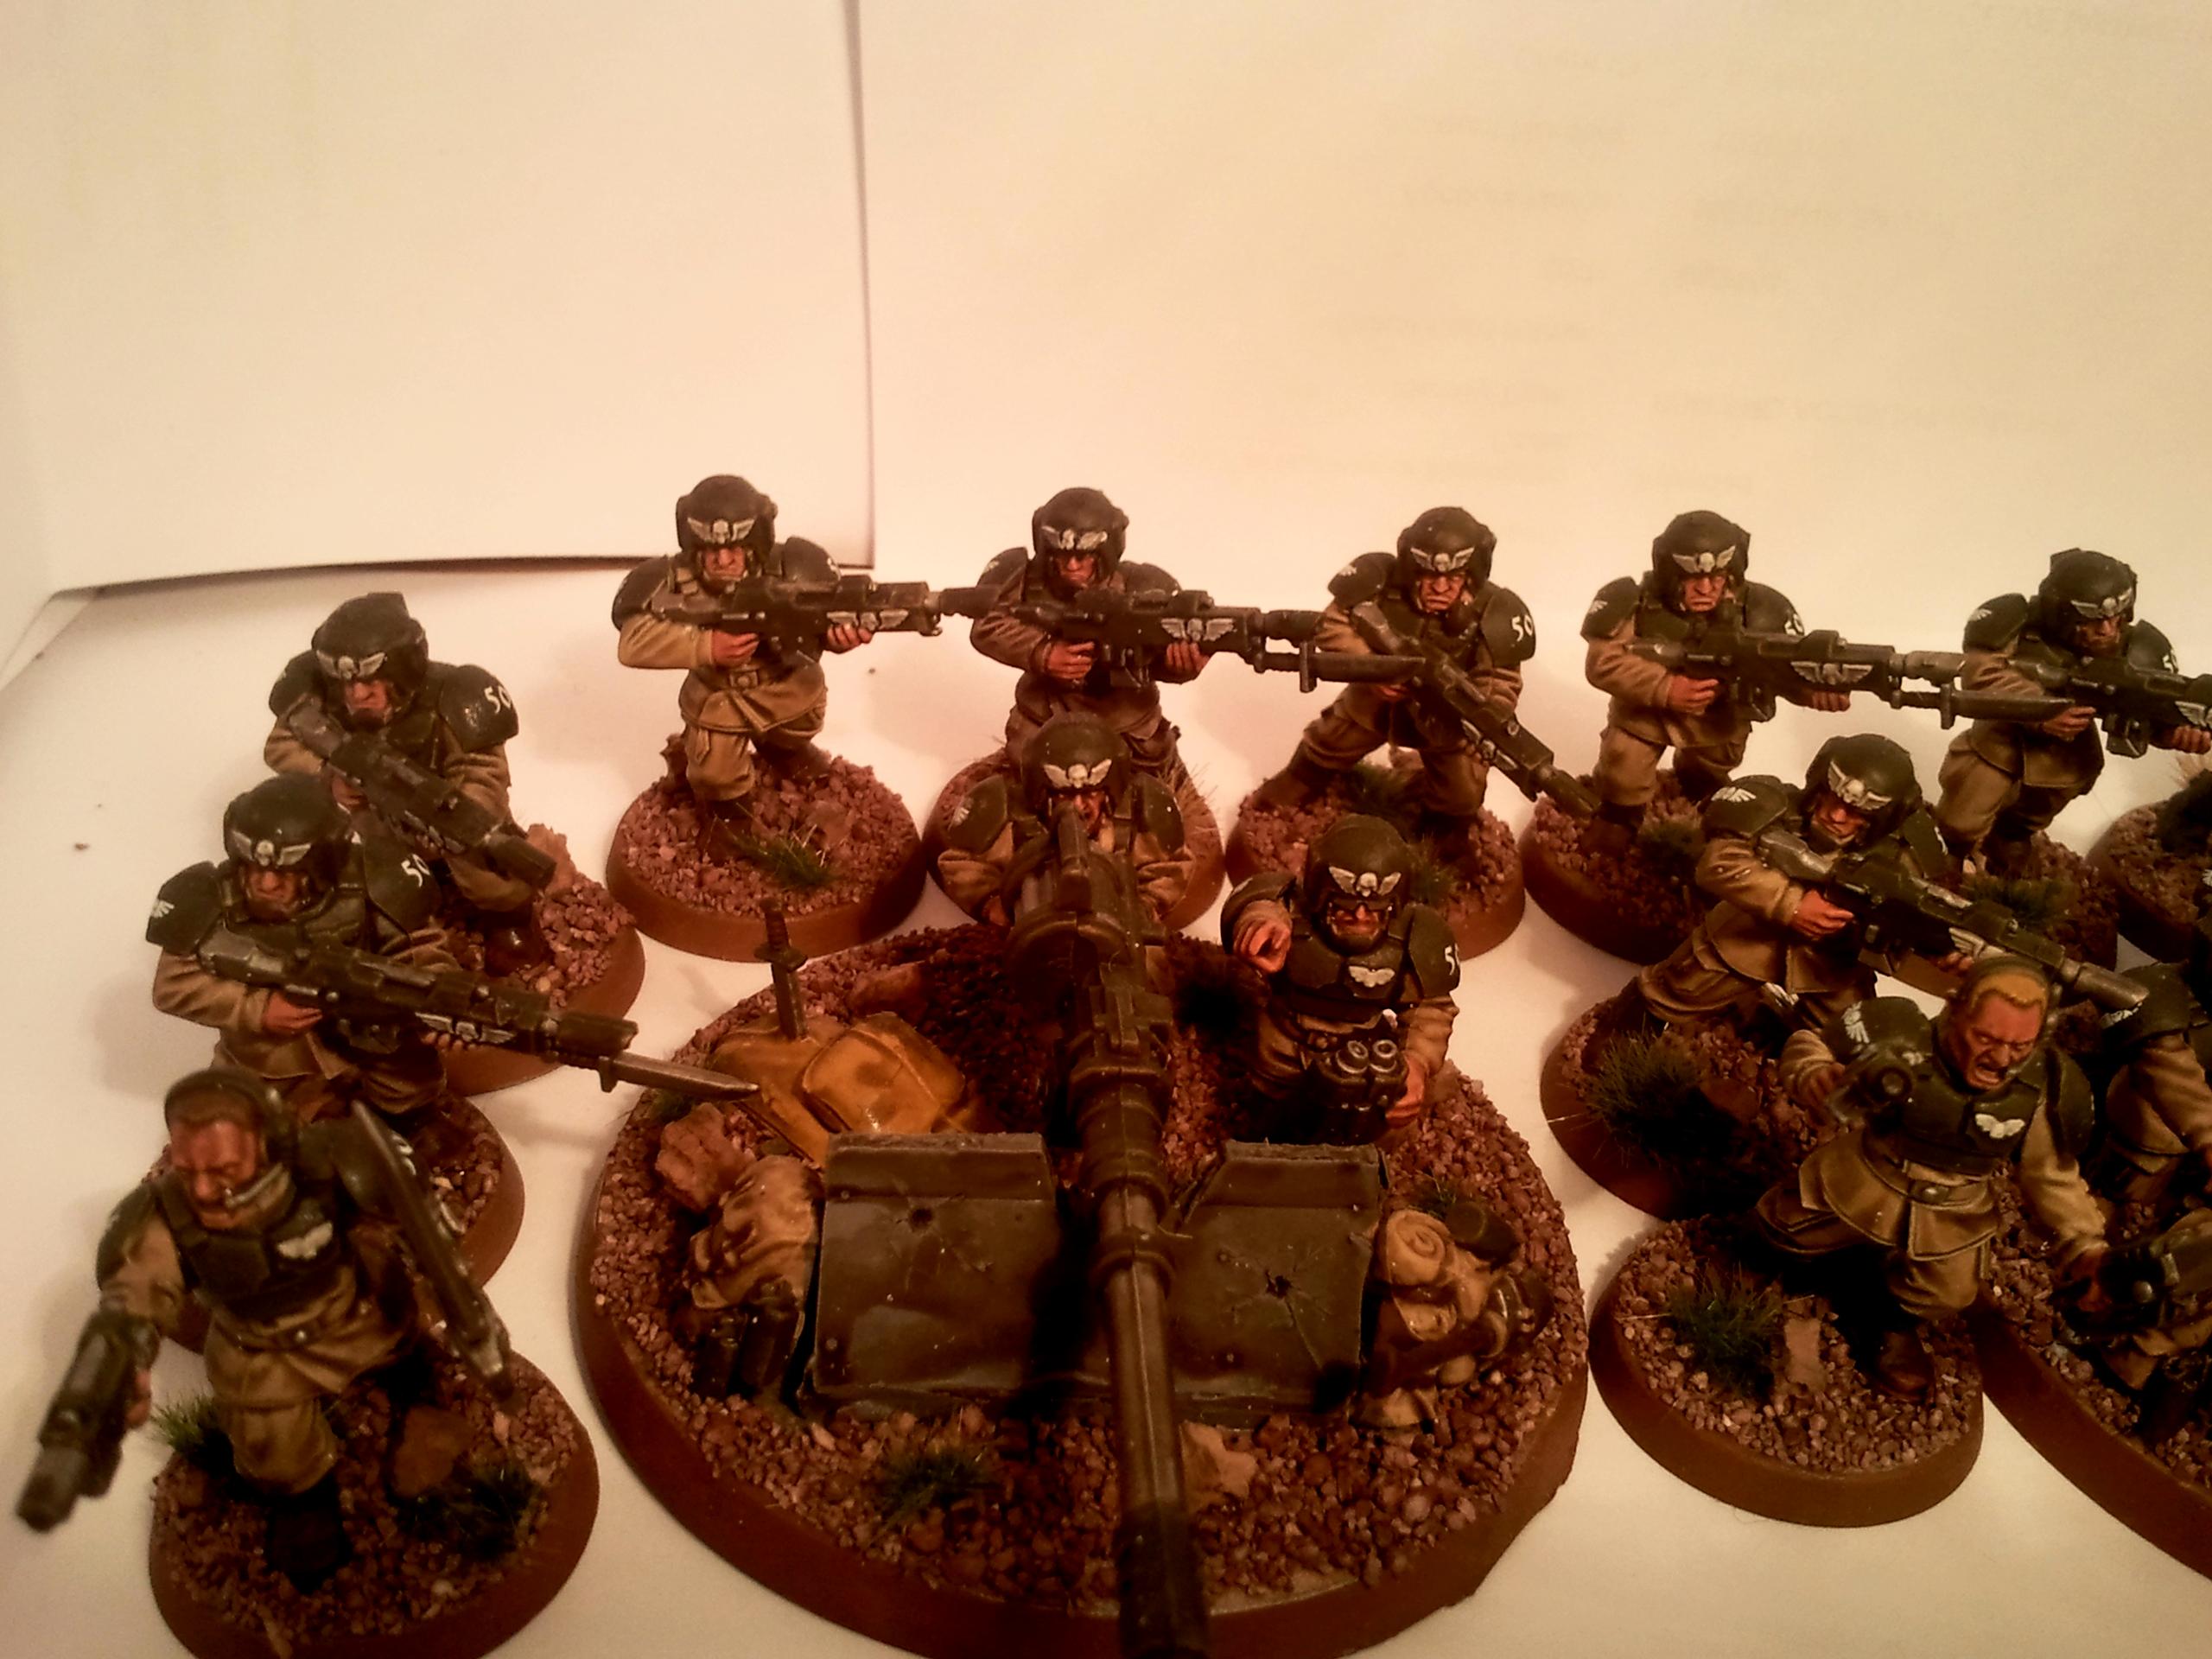 Cadians, Heavy Weapons Team, Imperial Guard, Infantry, It, Miniatures, Shock Troops, Terrain